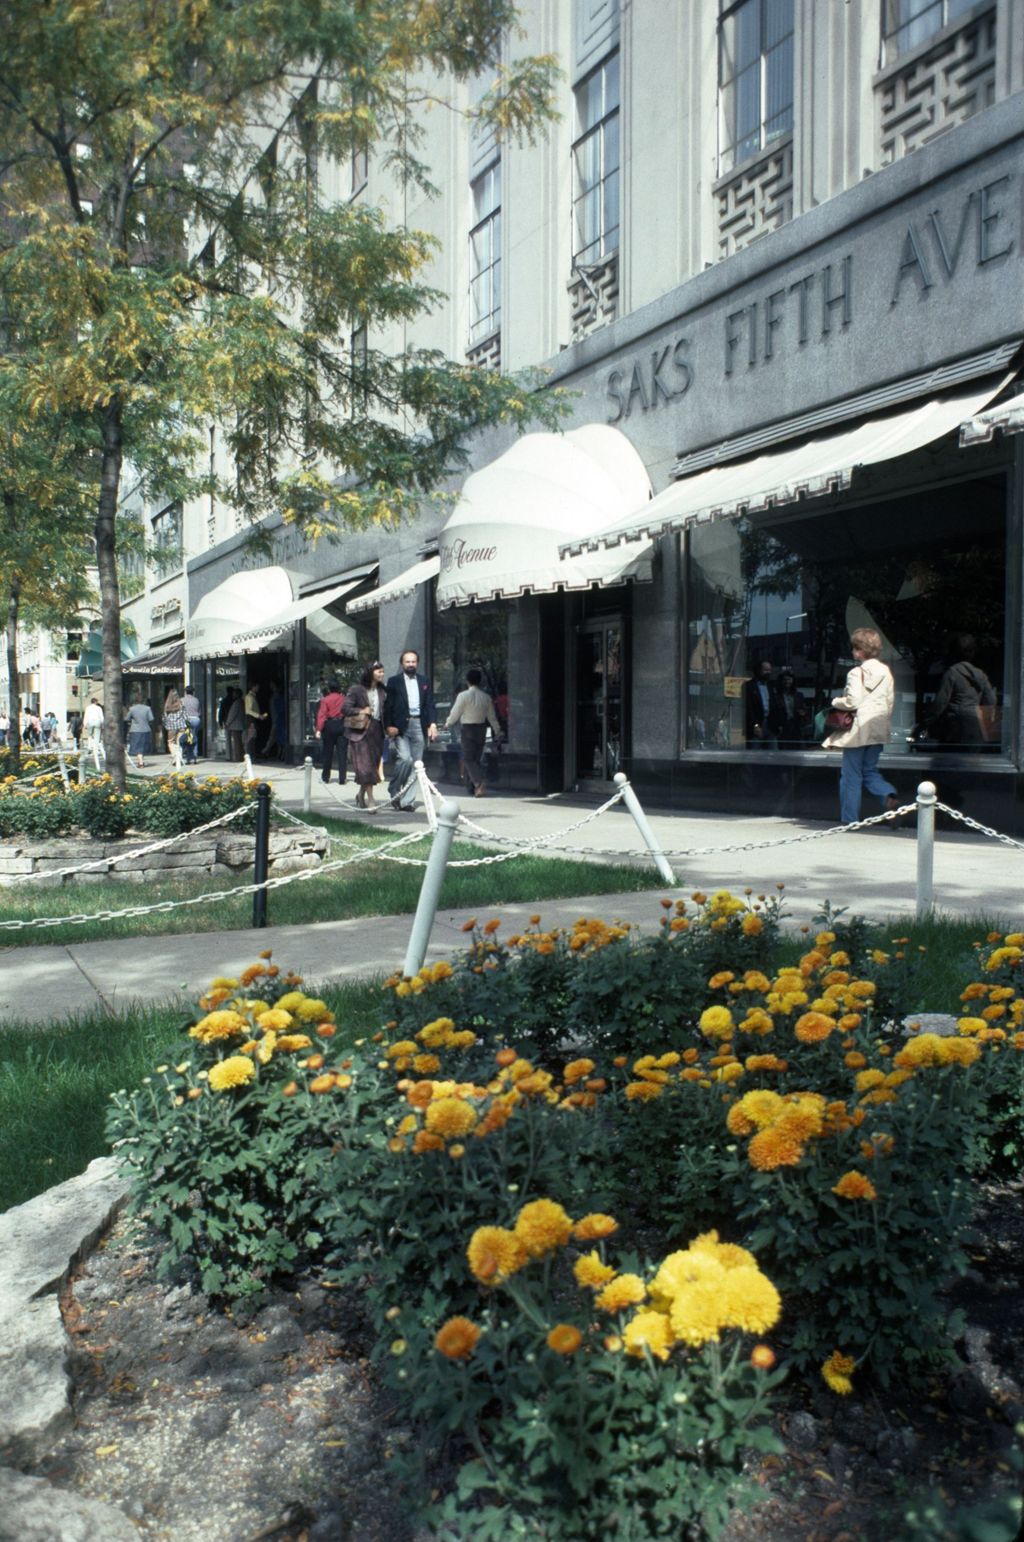 Landscaping along North Michigan Avenue, in front of Saks Fifth Avenue store